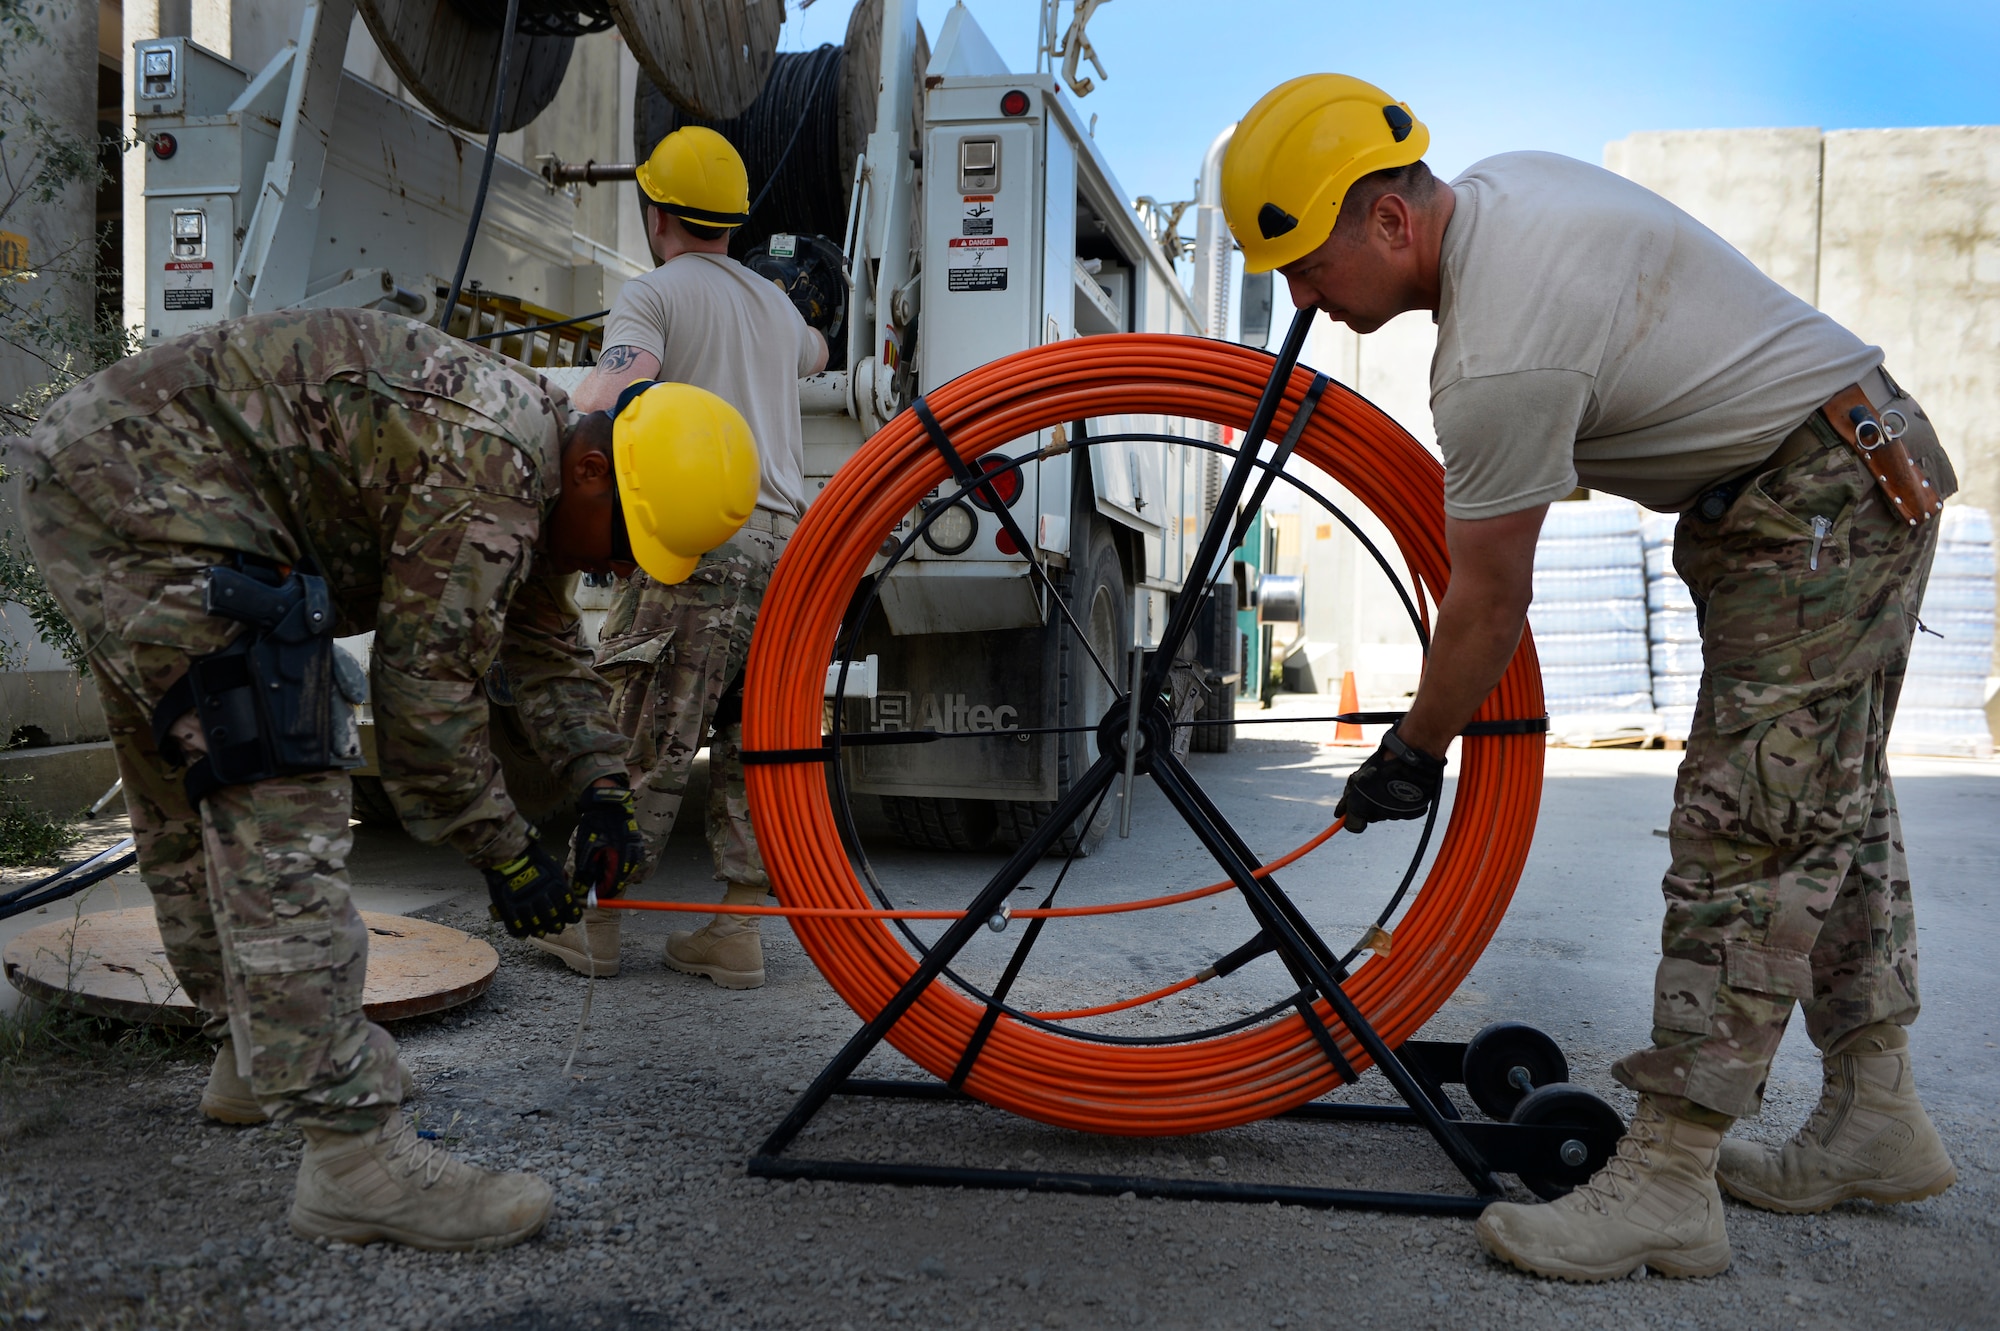 Staff Sgt. Lawence Santos (left) and Senior Airman Ariel Roldan, prepare the duct rod before running a cable May 15, 2014, at Bagram Airfield, Afghanistan. The cable is being used at the Air Traffic Control Tower and Command Post to provide connections for several necessary communication supports needed throughout the base. Santos and Roldan are Combined Air and Space Operations Center Engineering and Installations cable and antenna technicians deployed from the 212th Engineering and Installation Squadron, Otis Air National Guard Base, Mass. (U.S. Air Force photo/Senior Airman Sandra Welch)